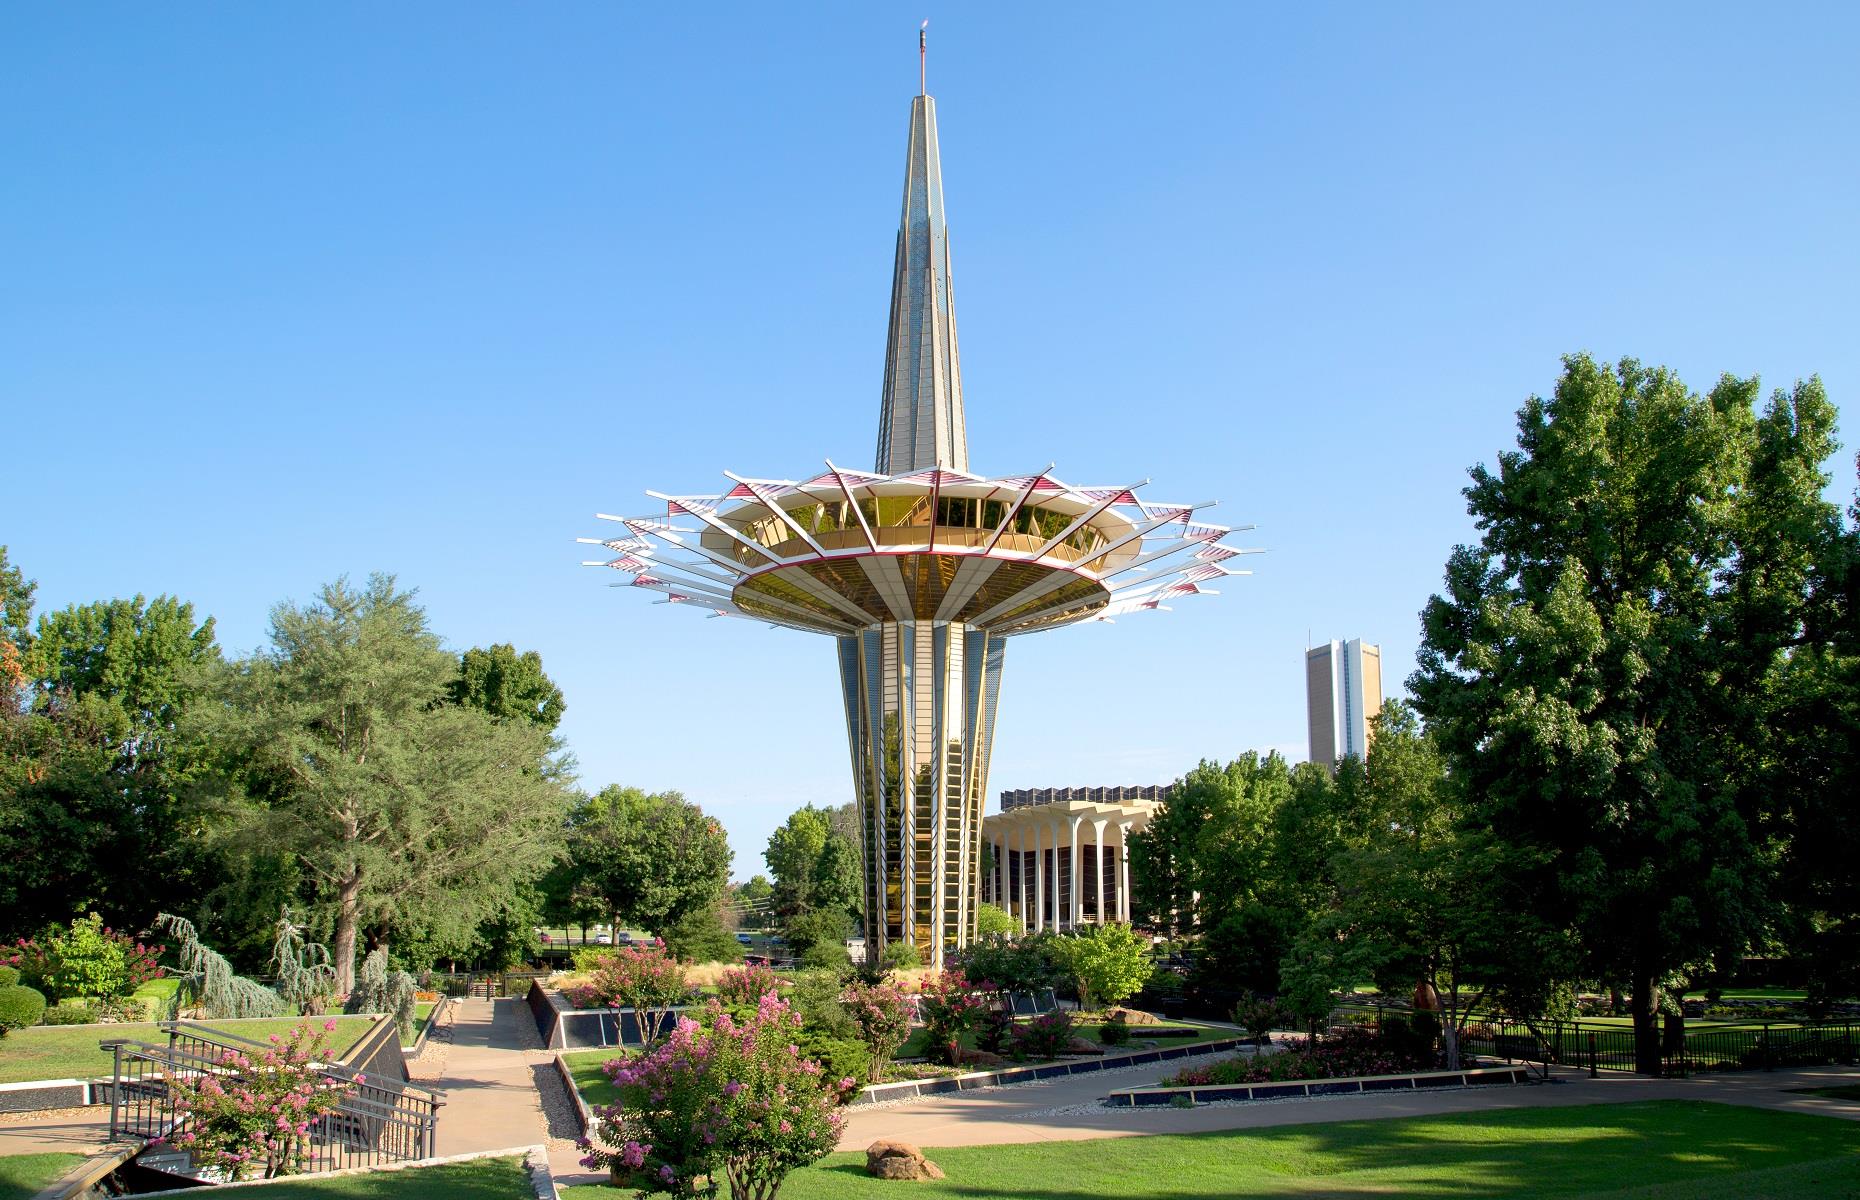 <p>Oral Roberts University has one of the most unique campuses in the world. Founded in 1963 in Tulsa, Oklahoma, the modern evangelical university is home to a vast array of futuristic, Art Deco-inspired buildings, each of which symbolises an element of the Christian faith. As well as the ultra-modern student centre, the campus is also home to a striking statue known as the Prayer Hands (exactly what it sounds like) and a 200-foot-tall (61m) Prayer Tower (pictured). You can take a <a href="https://oru.edu/virtual-tour/index.php">virtual tour</a> of the contemporary campus anytime you like.</p>